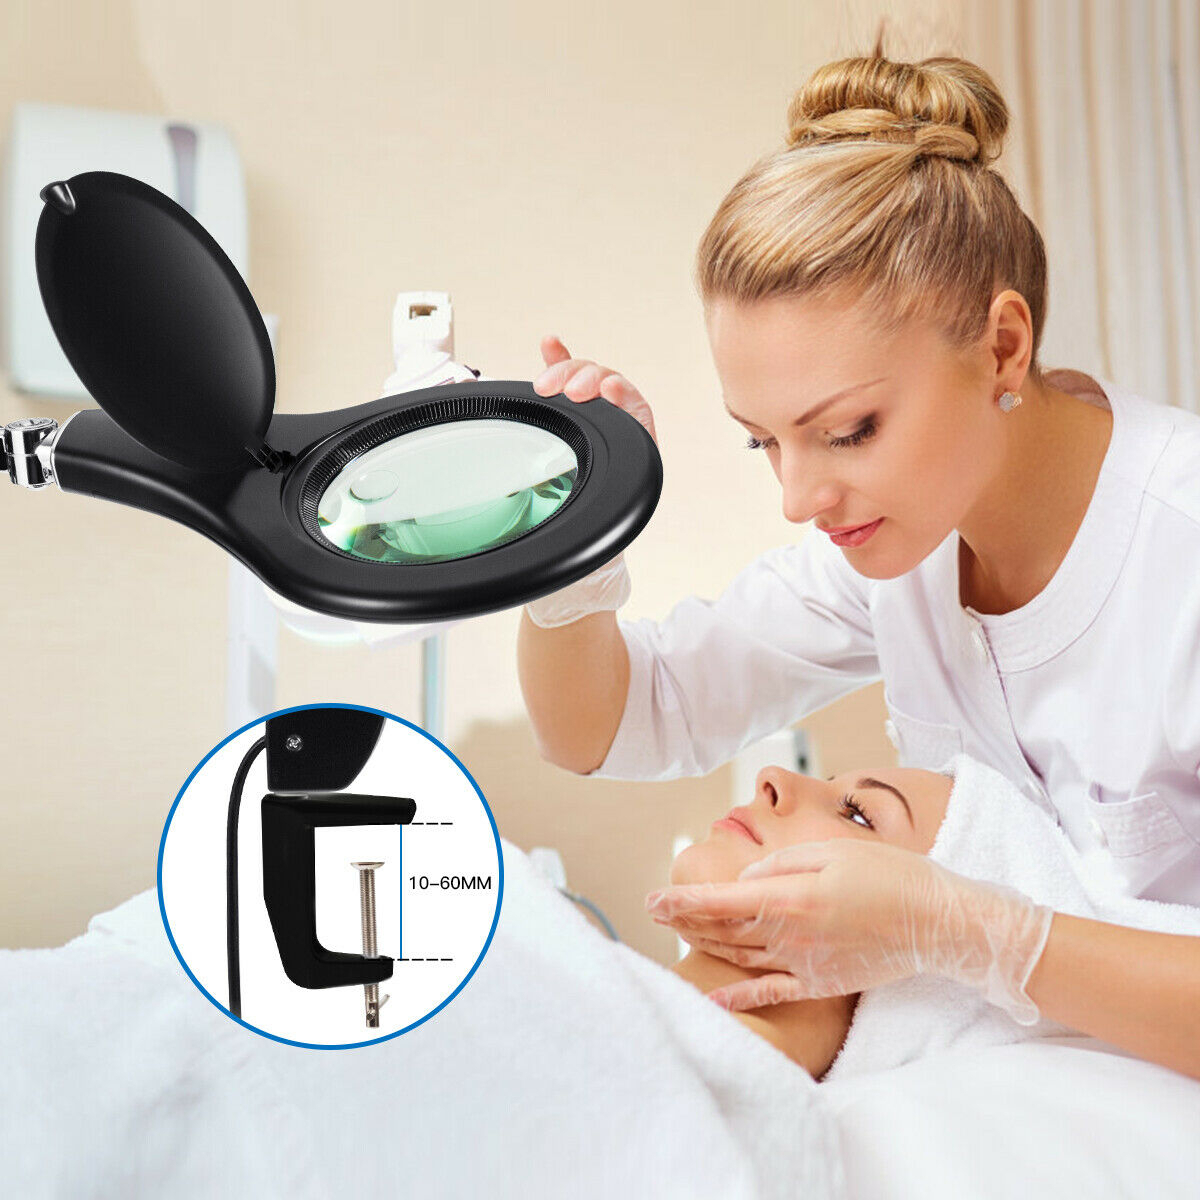 LED Magnifying Glass Desk Lamp W/ Swivel Arm & Clamp 2.25x Magnification Black